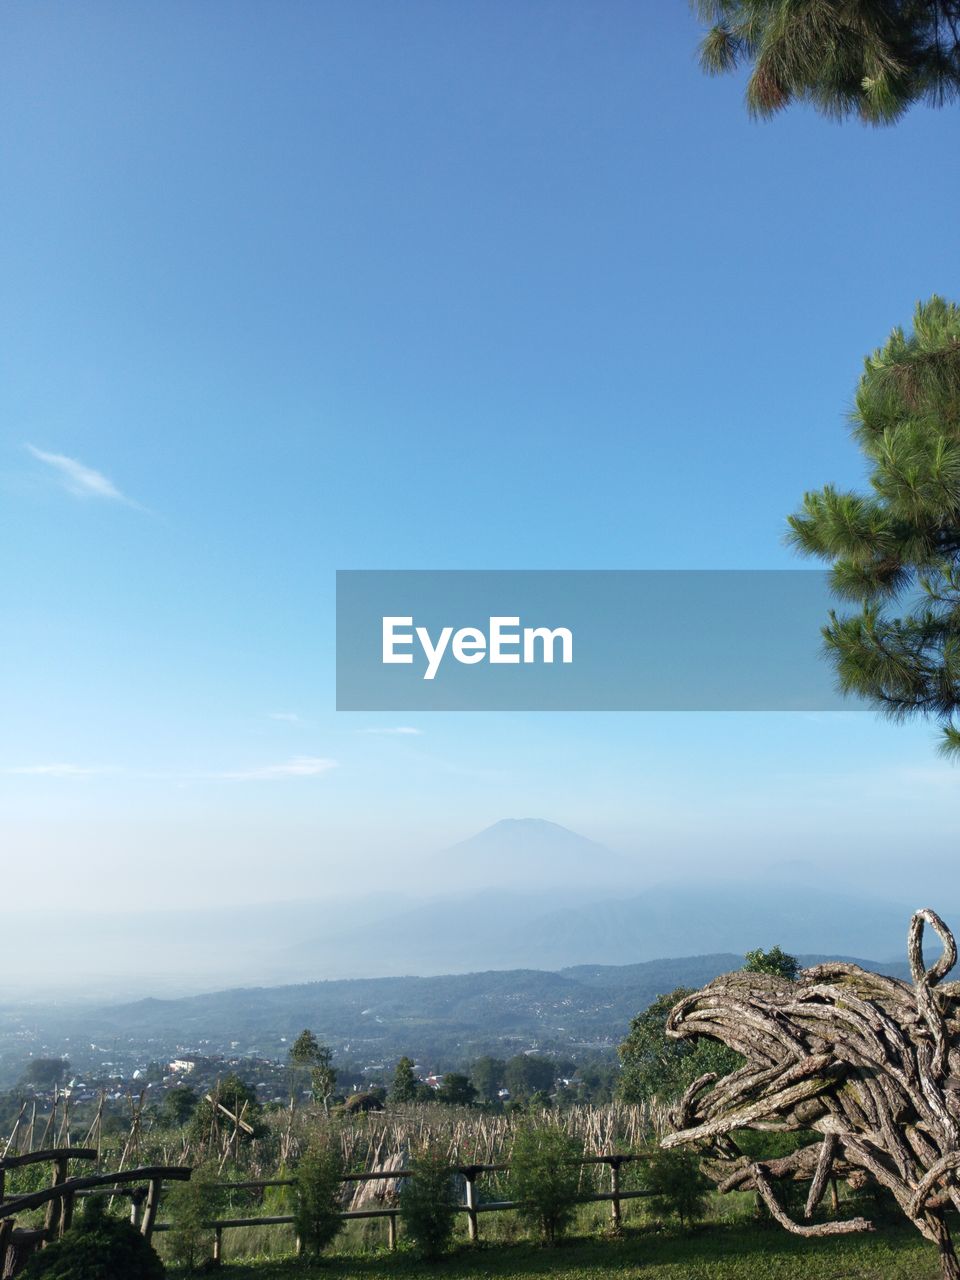 sky, tree, plant, nature, scenics - nature, landscape, beauty in nature, architecture, environment, no people, blue, tranquility, hill, tranquil scene, day, water, sea, land, outdoors, built structure, vacation, travel destinations, building, rural area, horizon, copy space, travel, cloud, building exterior, tropical climate, palm tree, sunlight, idyllic, clear sky, coast, green, growth